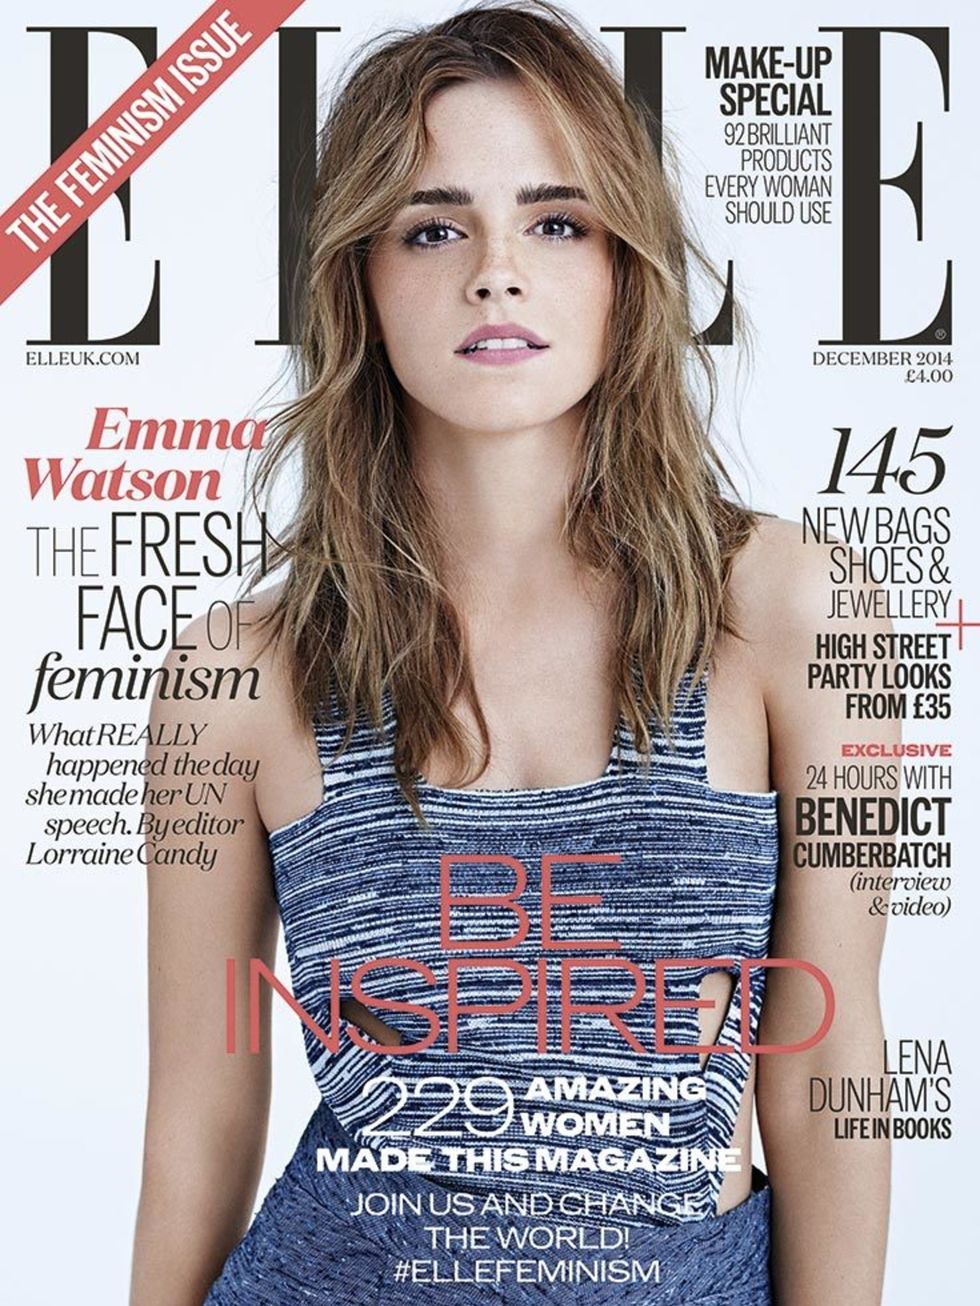 <p><strong>Emma Watson, Actress </strong></p>

<p>'We want to empower women to do exactly what they want, to be true to themselves, to have the opportunities to develop. Women should feel free. There is no typical feminist, there is nothing anywhere that 